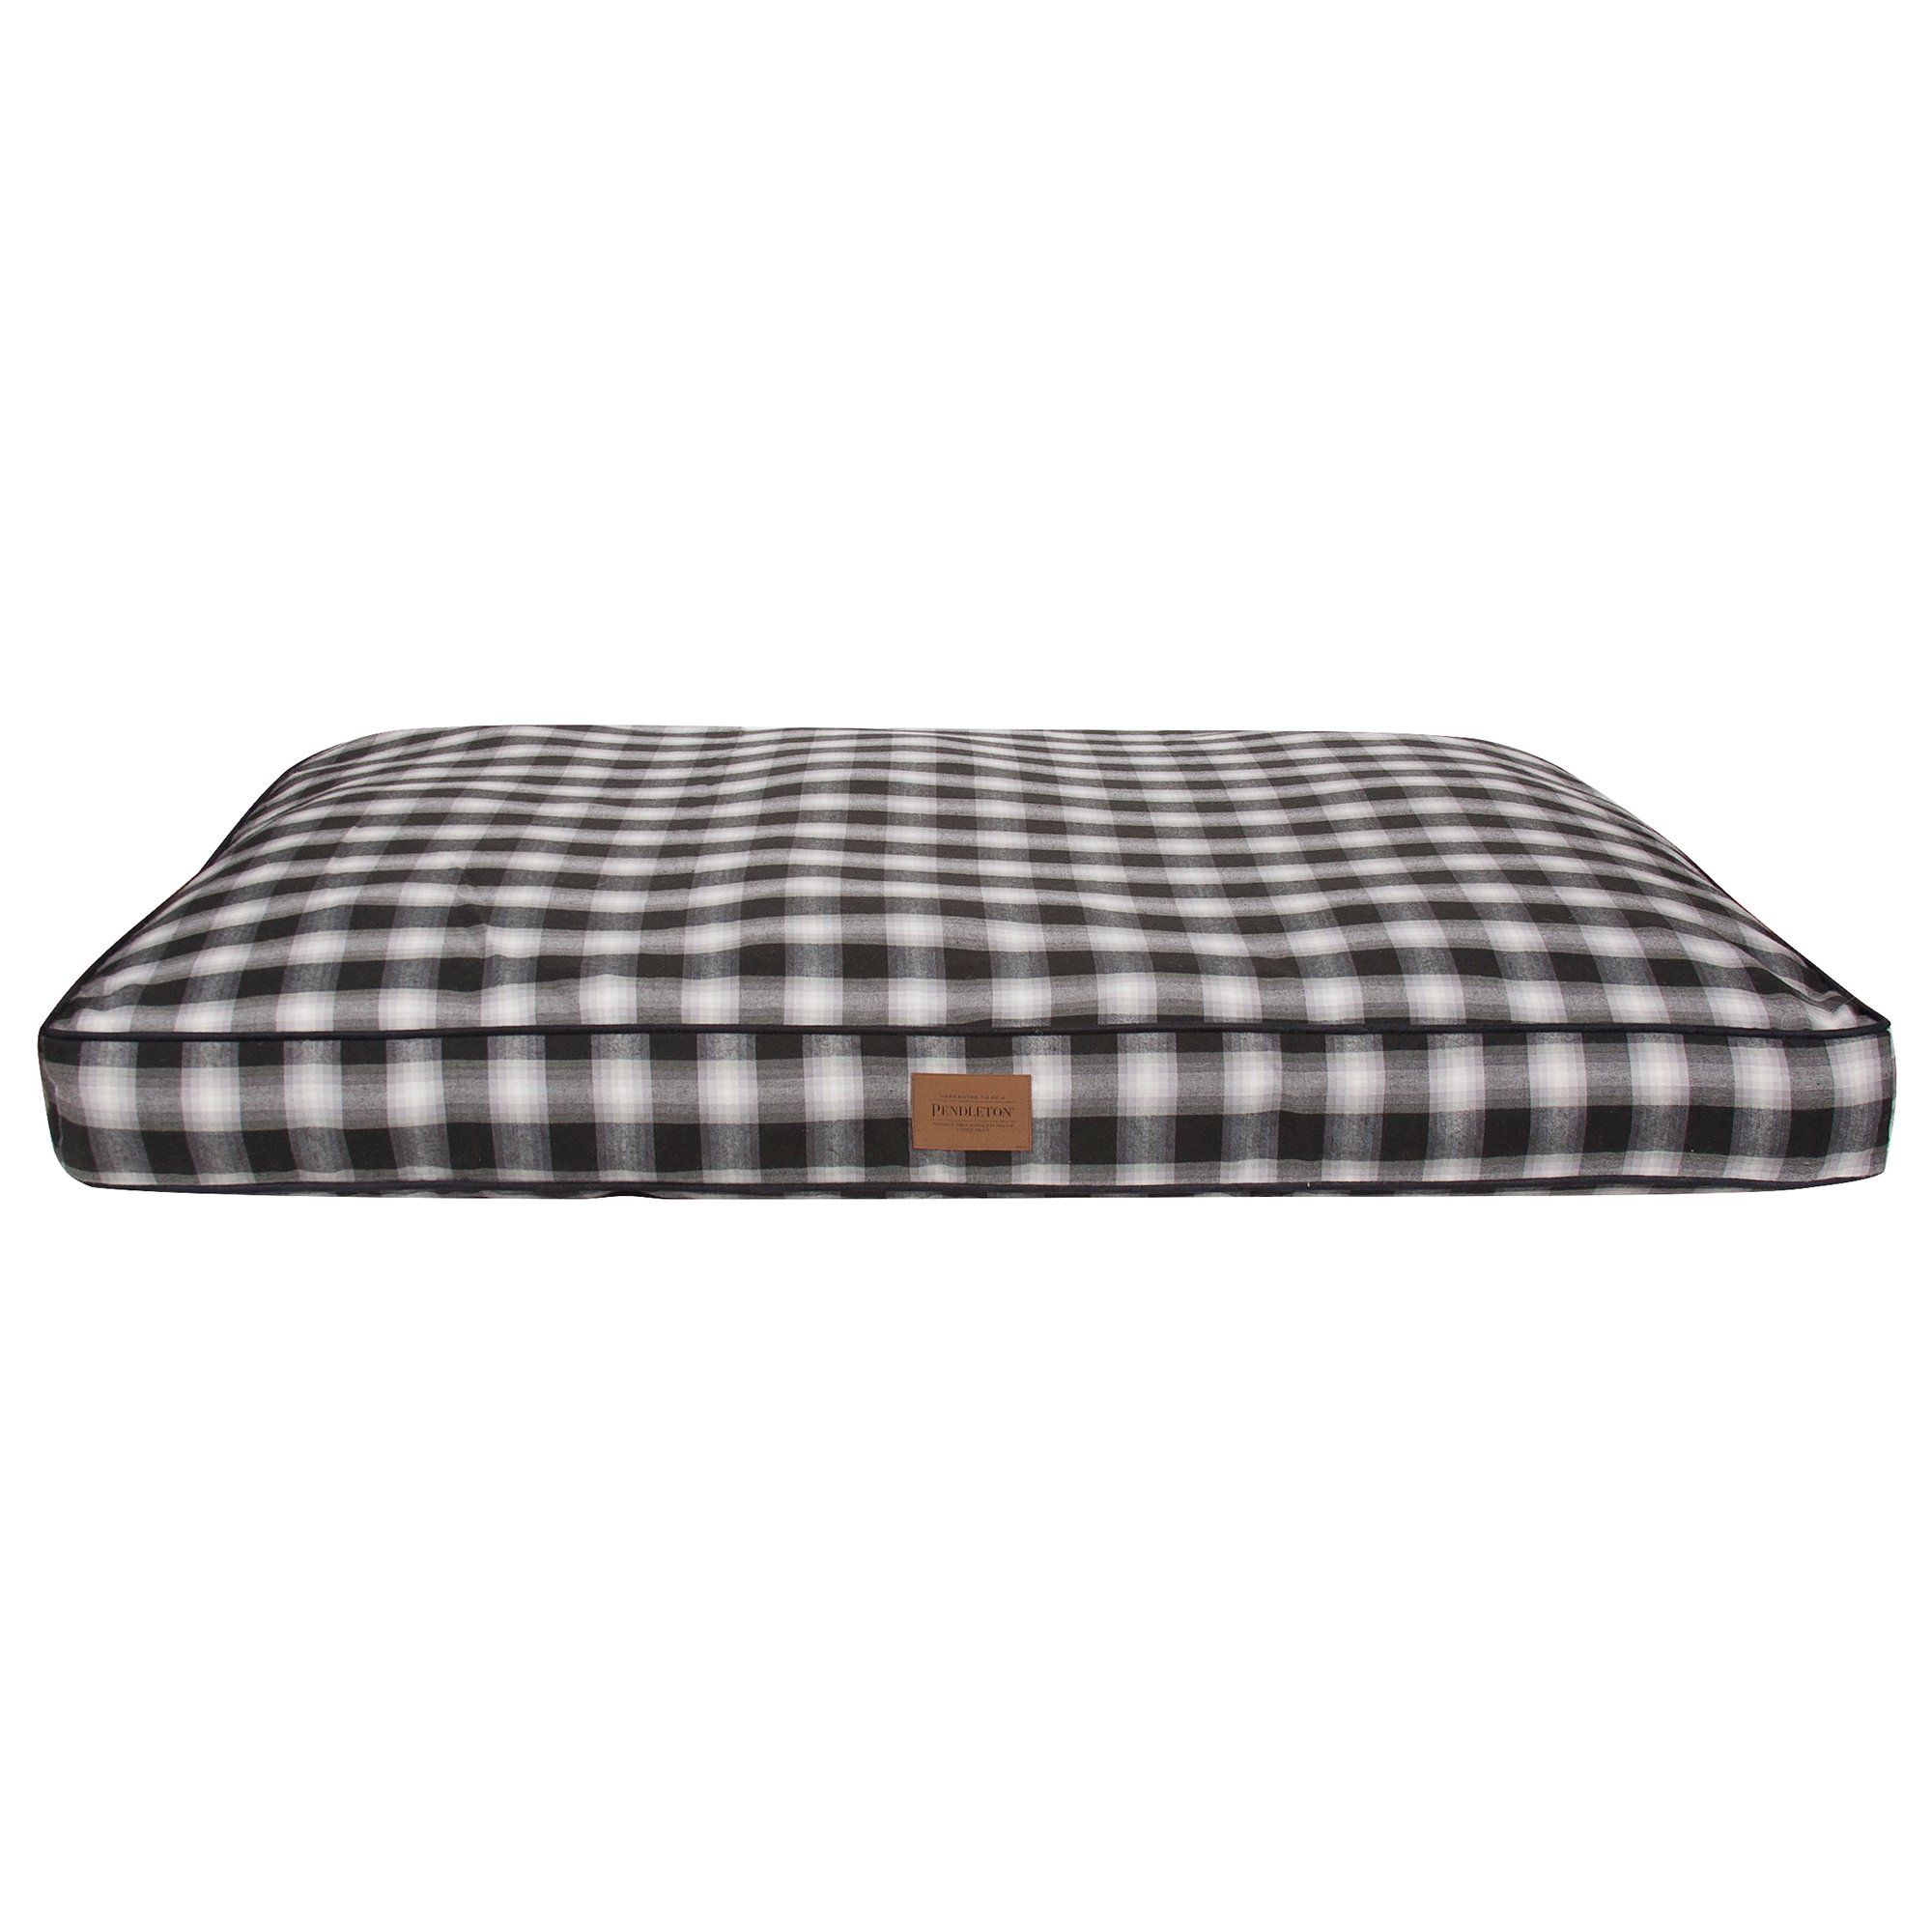 Pendleton Plaid Pet Bed in Charcoal Ombre, 48" L x 36" W, X-Large | PETCO Animal Supplies